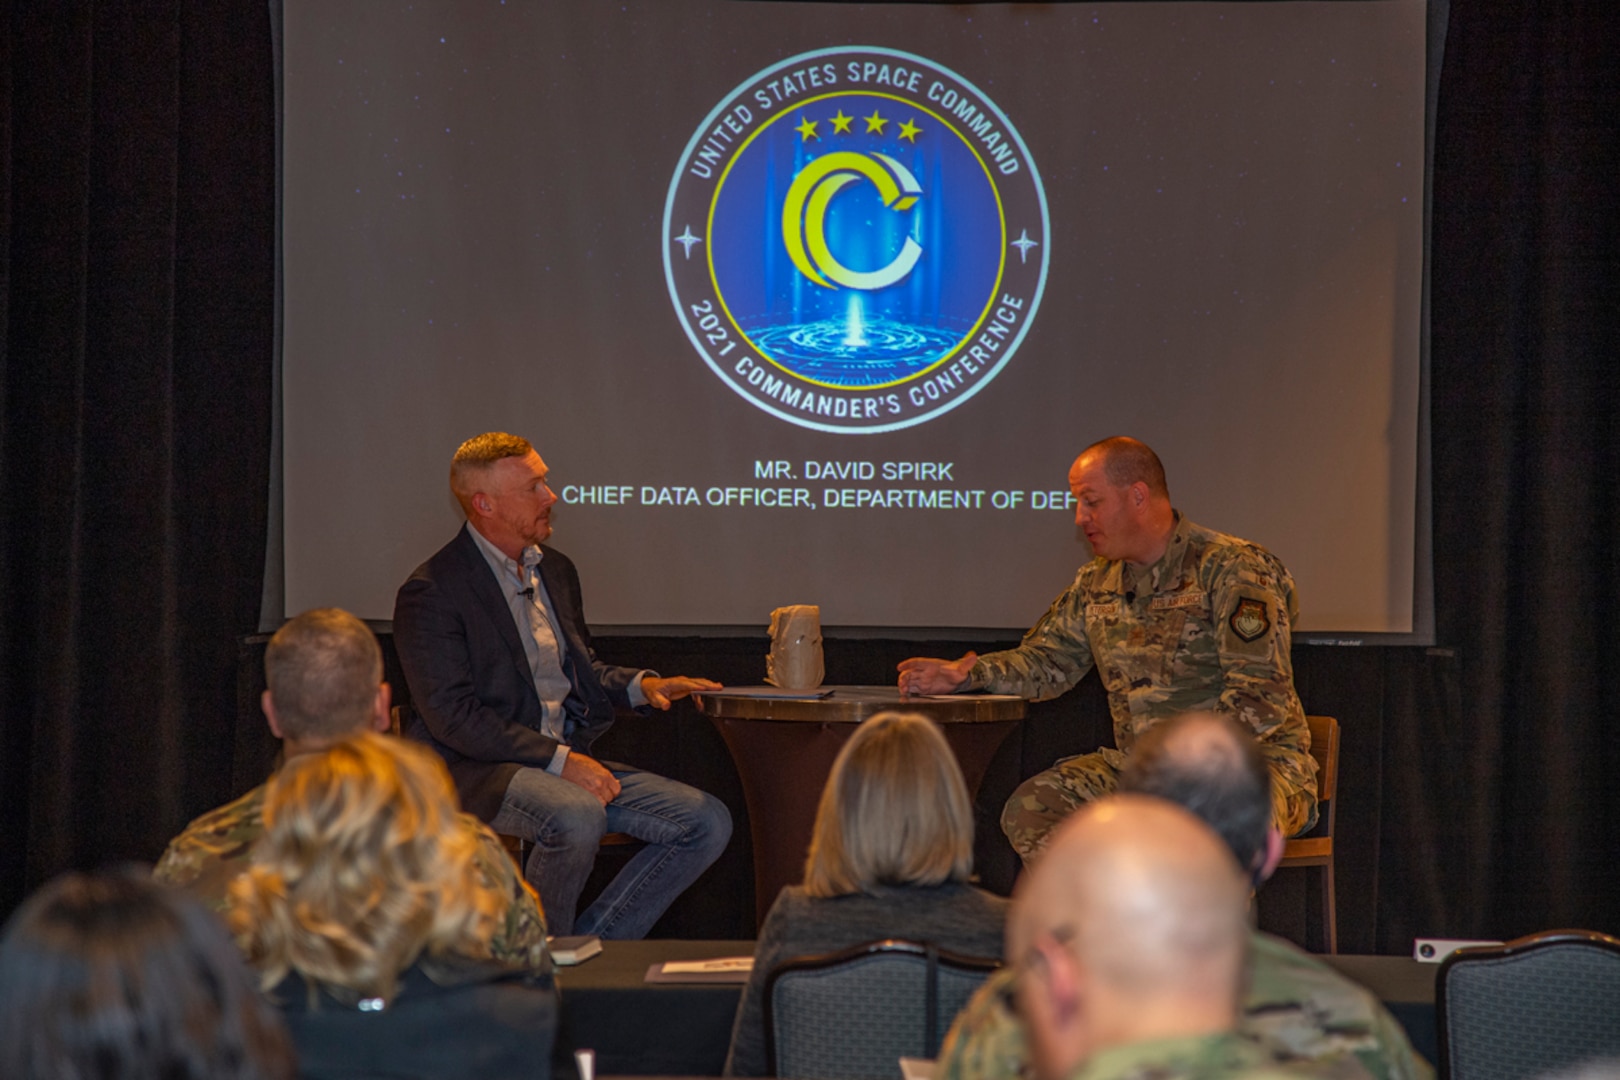 U.S. Air Force Col. James Peterson (right), USSPACECOM Commander’s Action Group chief, led a fireside chat with David Spirk (left), the U.S. Department of Defense’s chief data officer, at the 2021 Fall Commander’s Conference, Oct. 26, 2021, at Peterson Space Force Base, Colorado. Spirk discussed strengthening data management across the military and accelerating the transition to a data-centric culture.